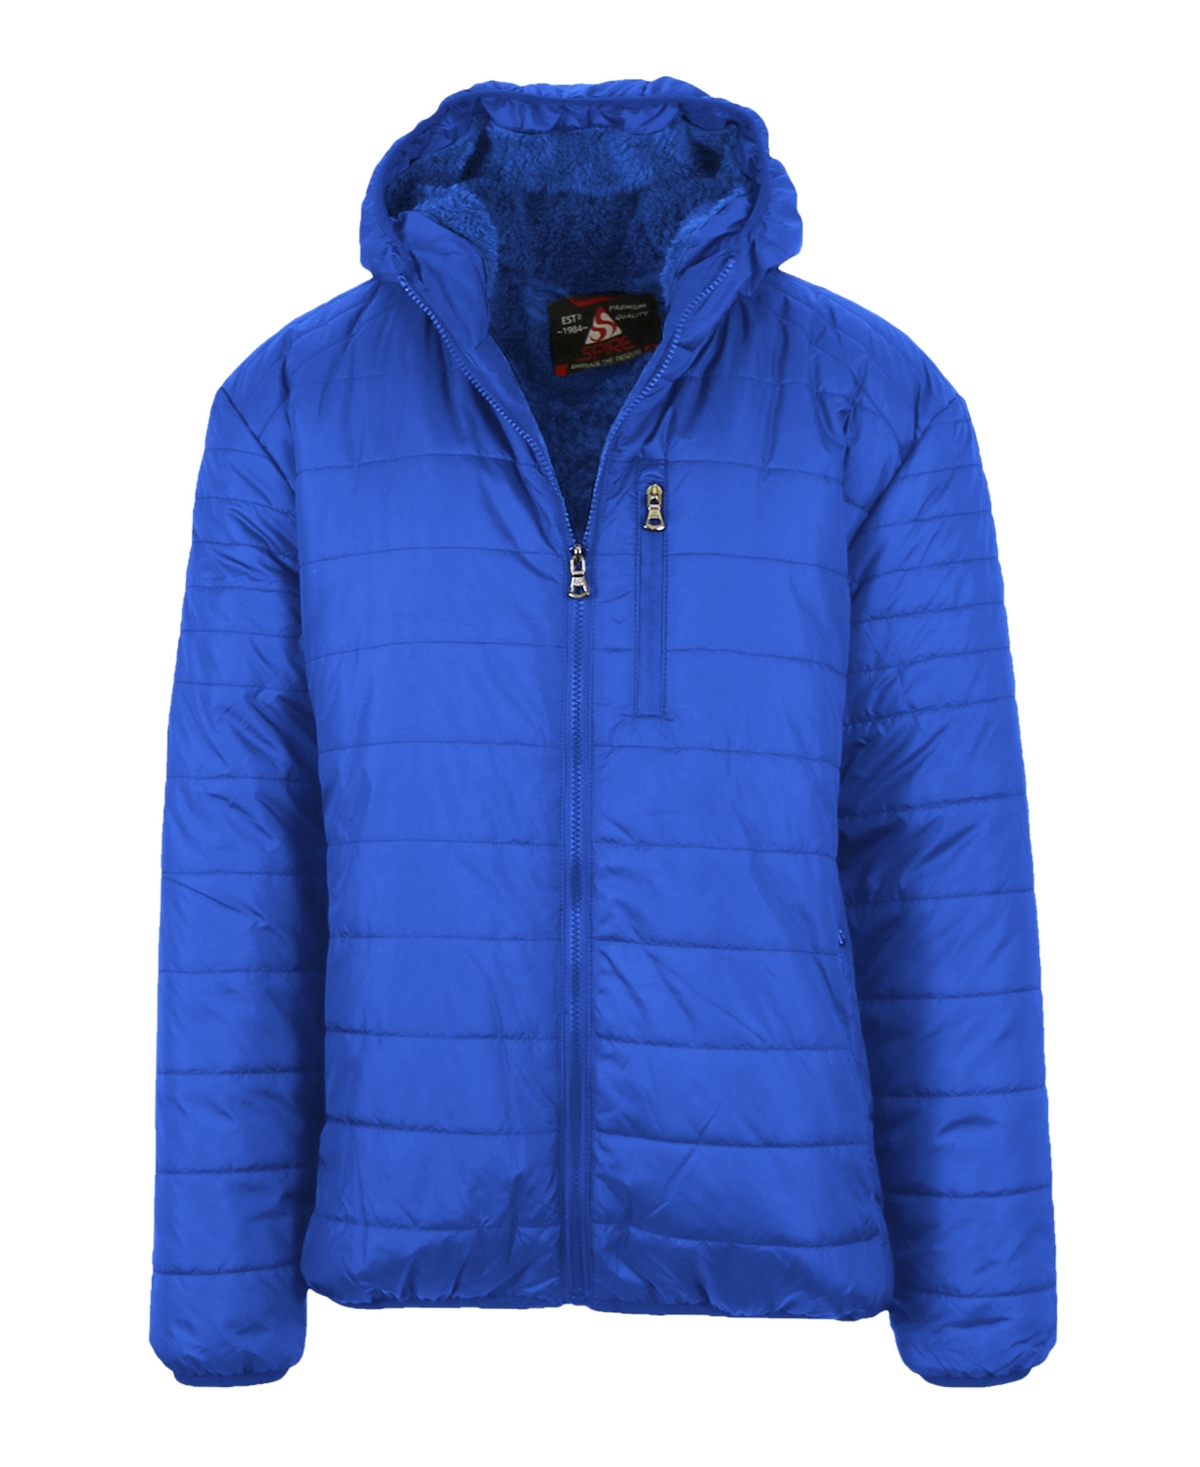 Men's Sherpa Lined Hooded Puffer Jacket - Royal